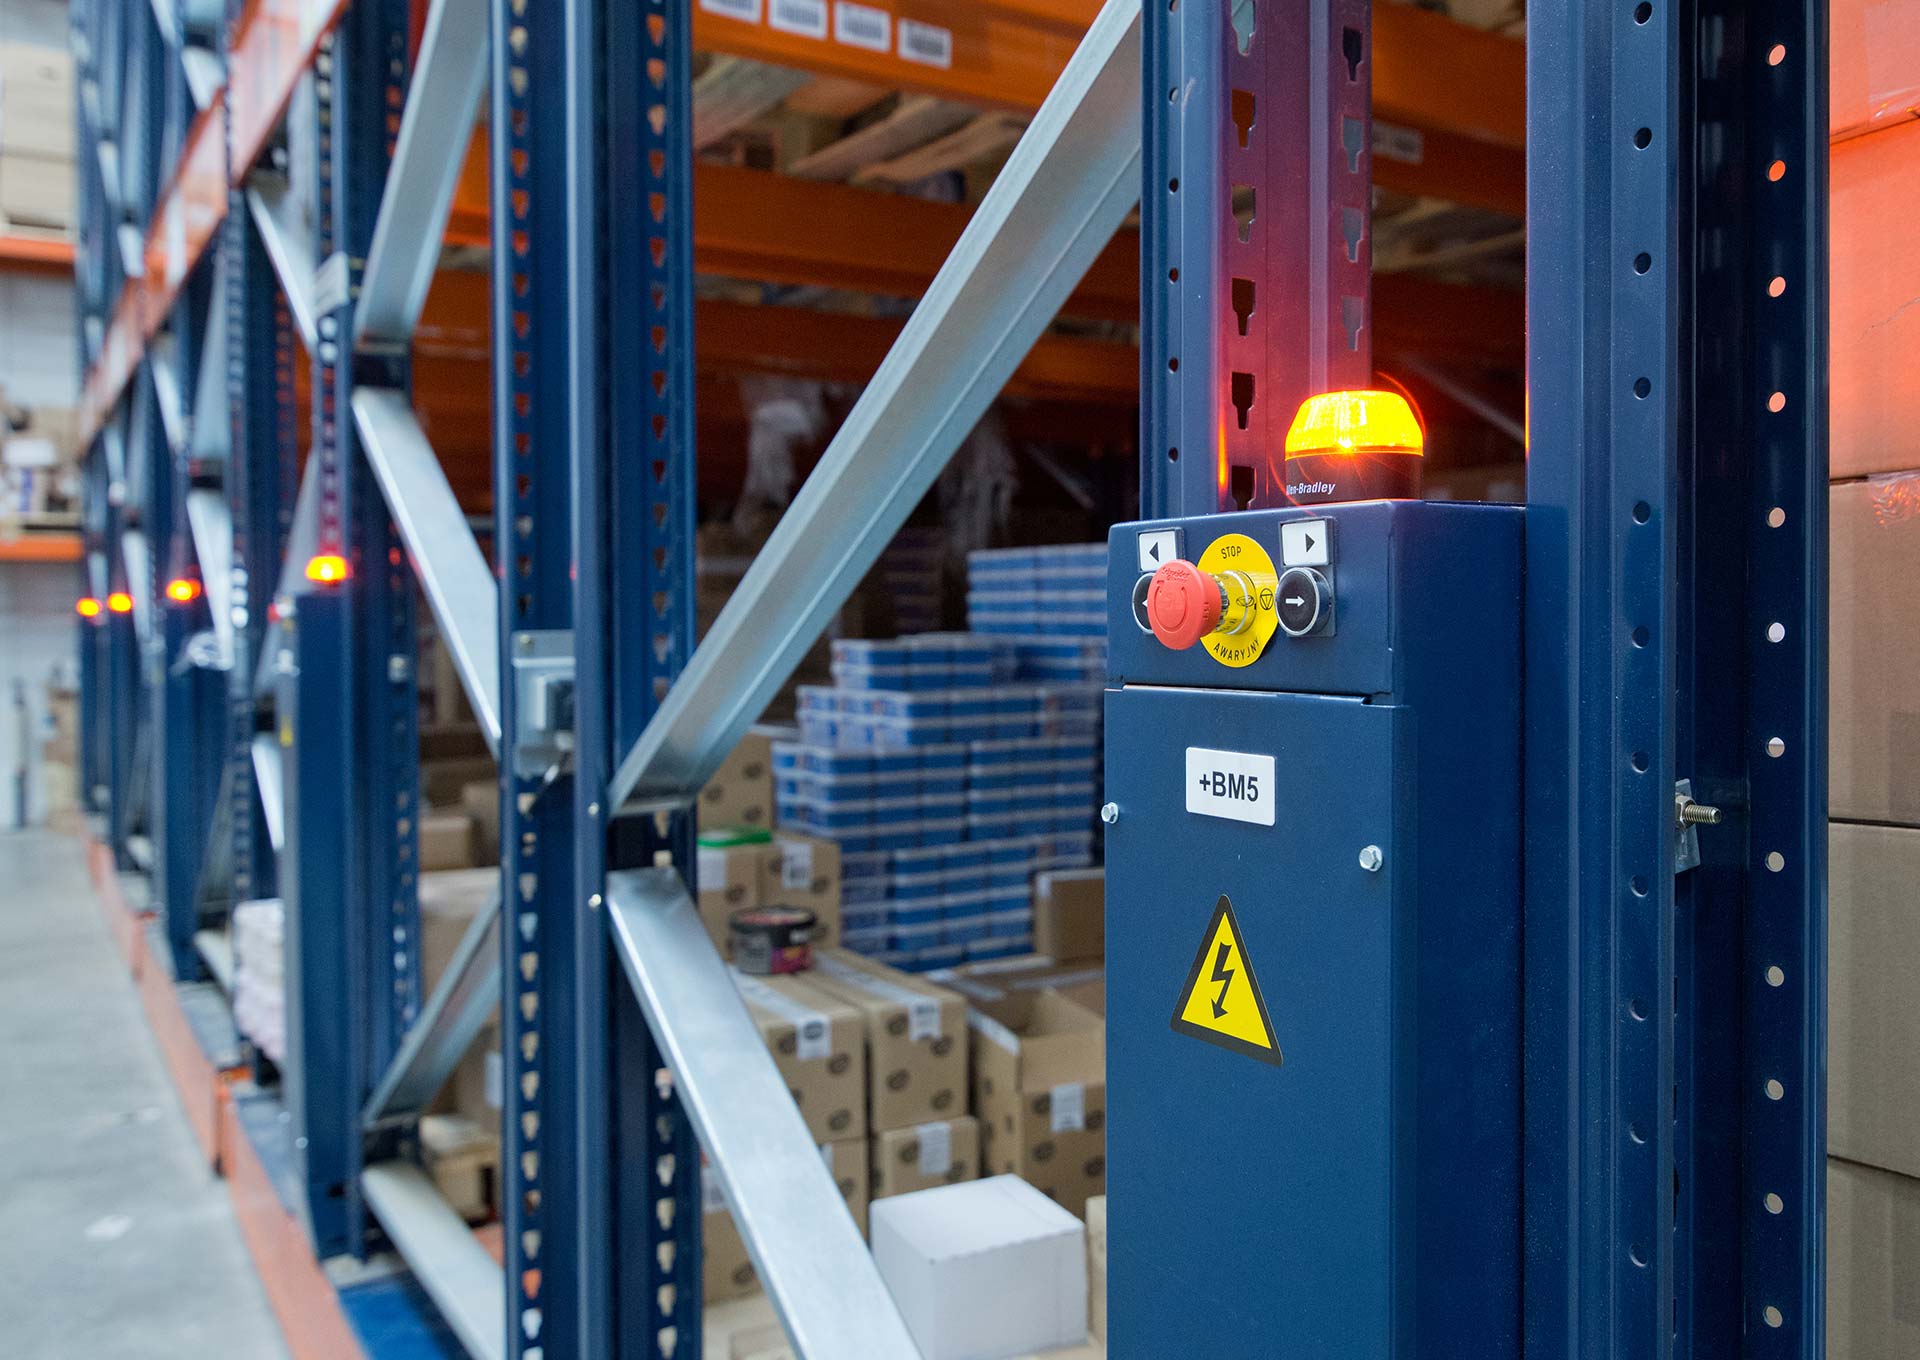 The on-board control panels let users monitor and control the operation of the mobile racking